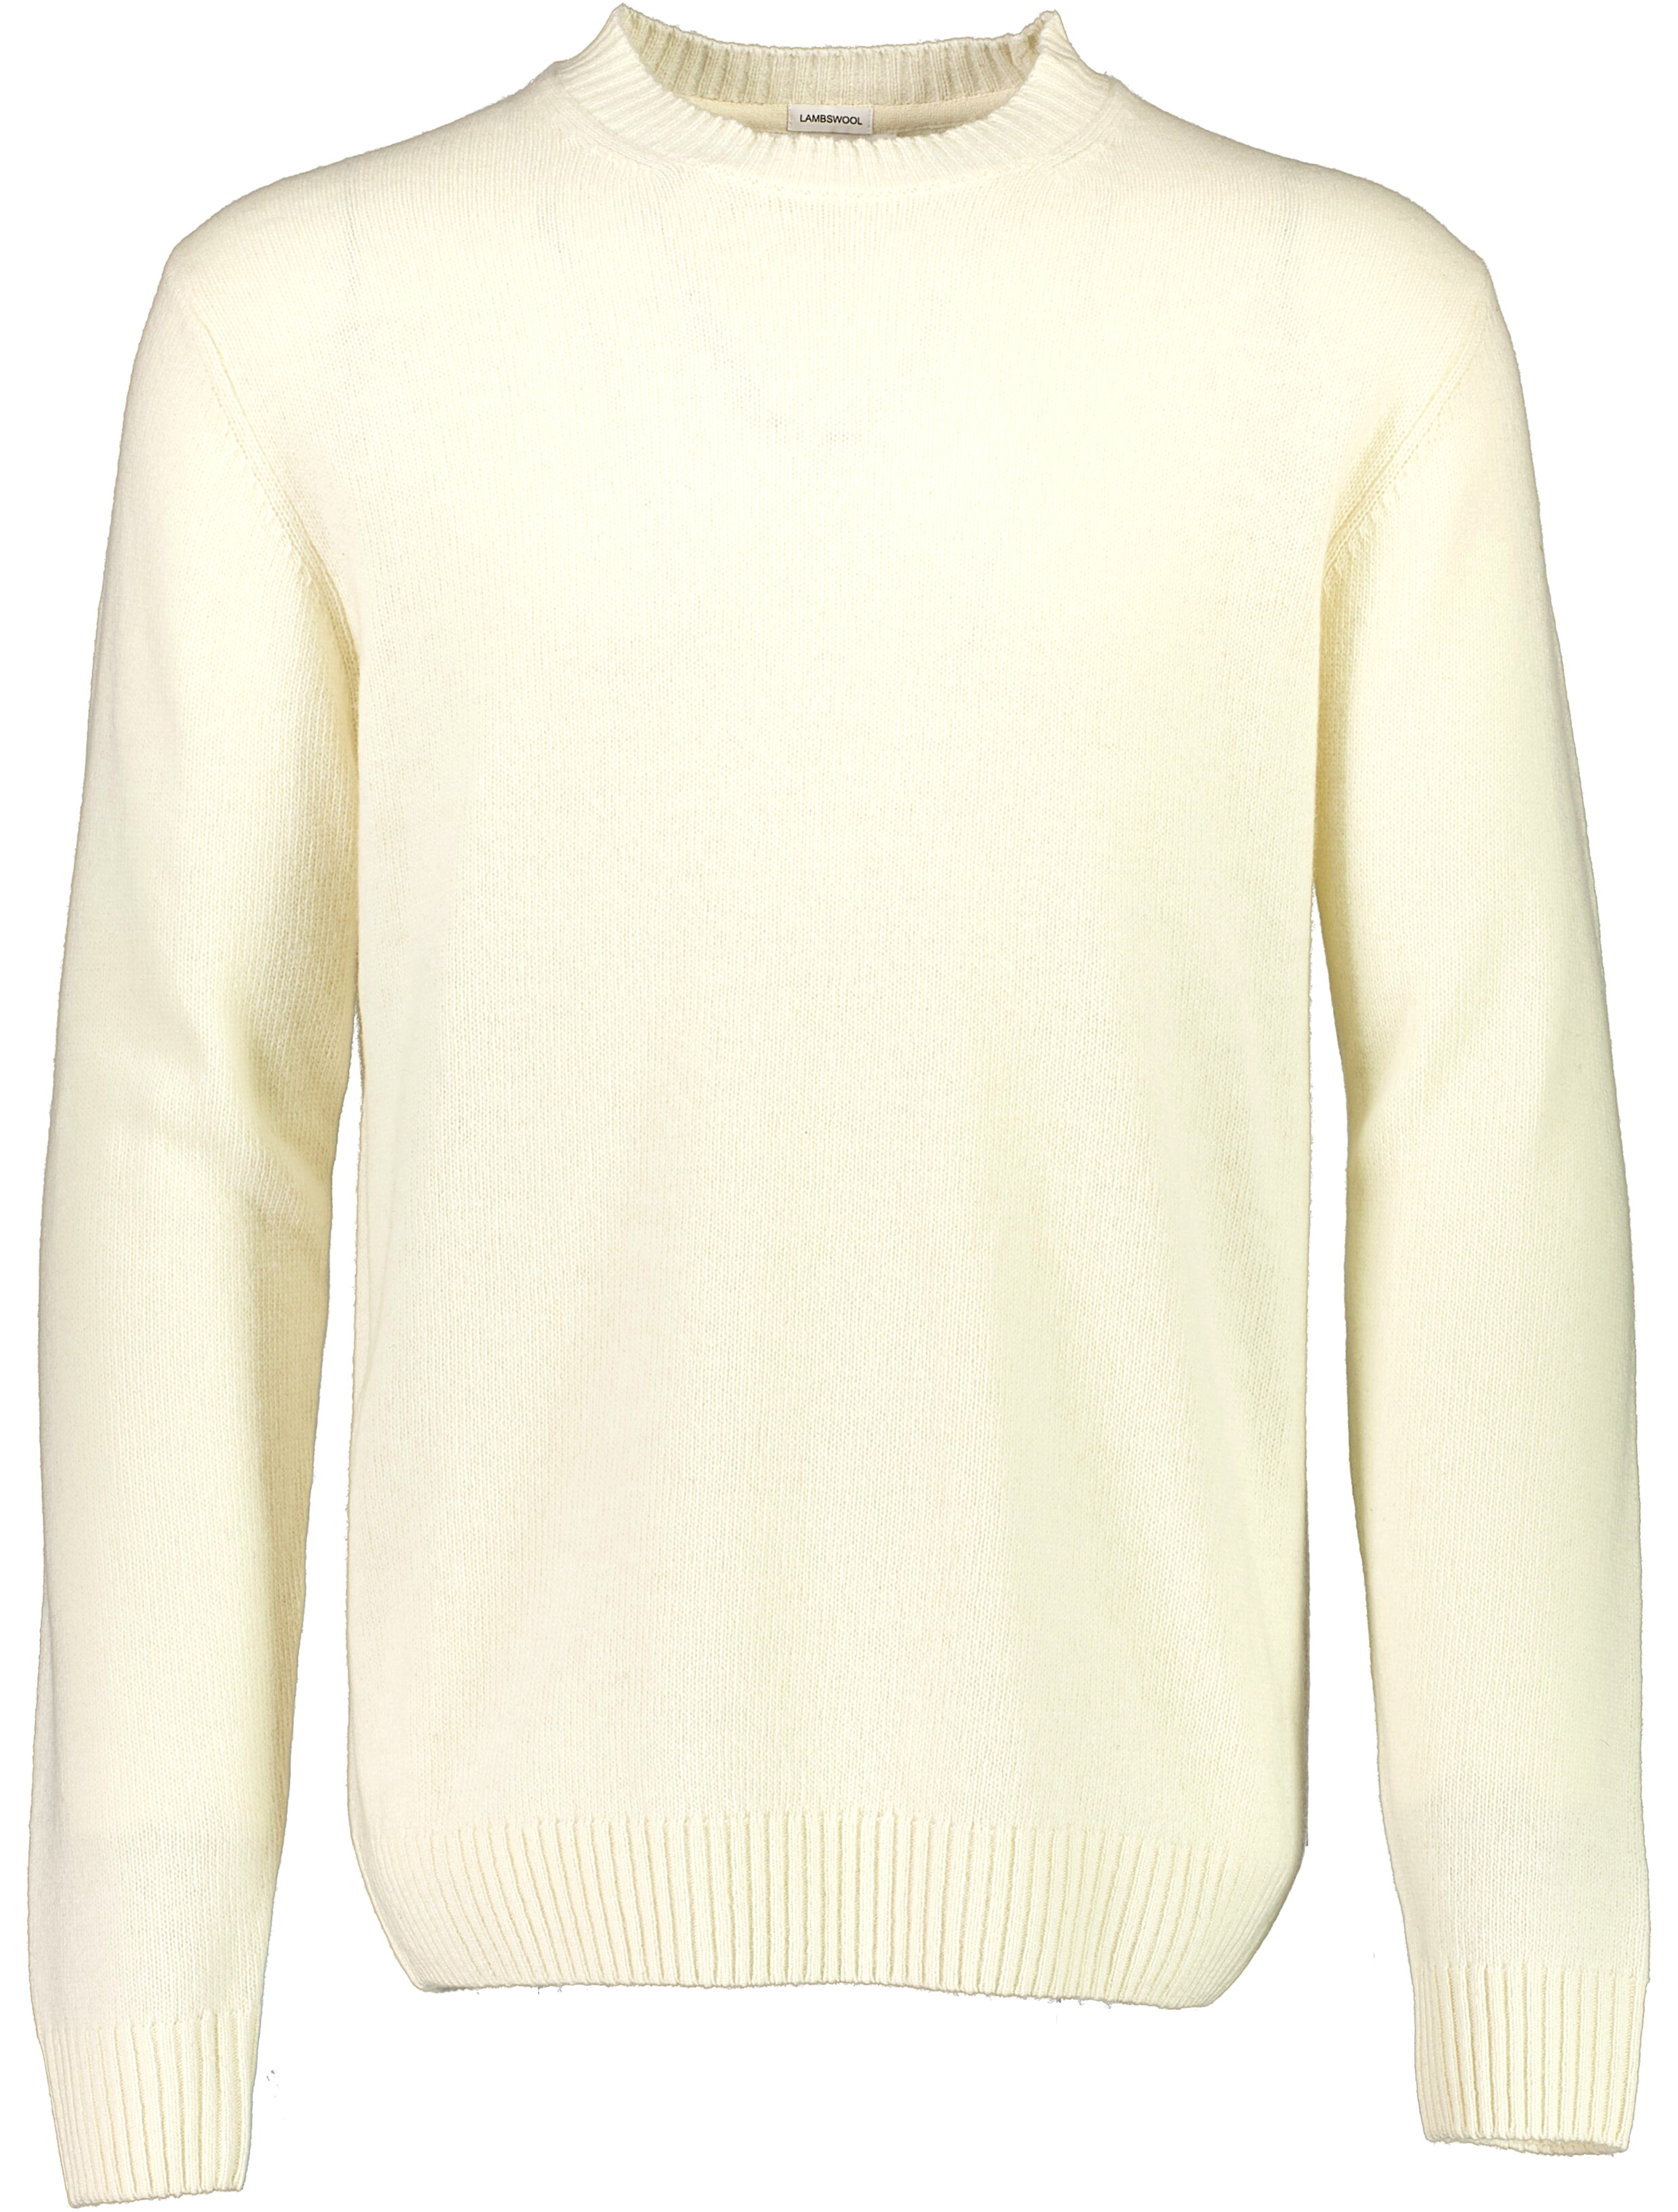 Lindbergh Strickpullover weiss / off white